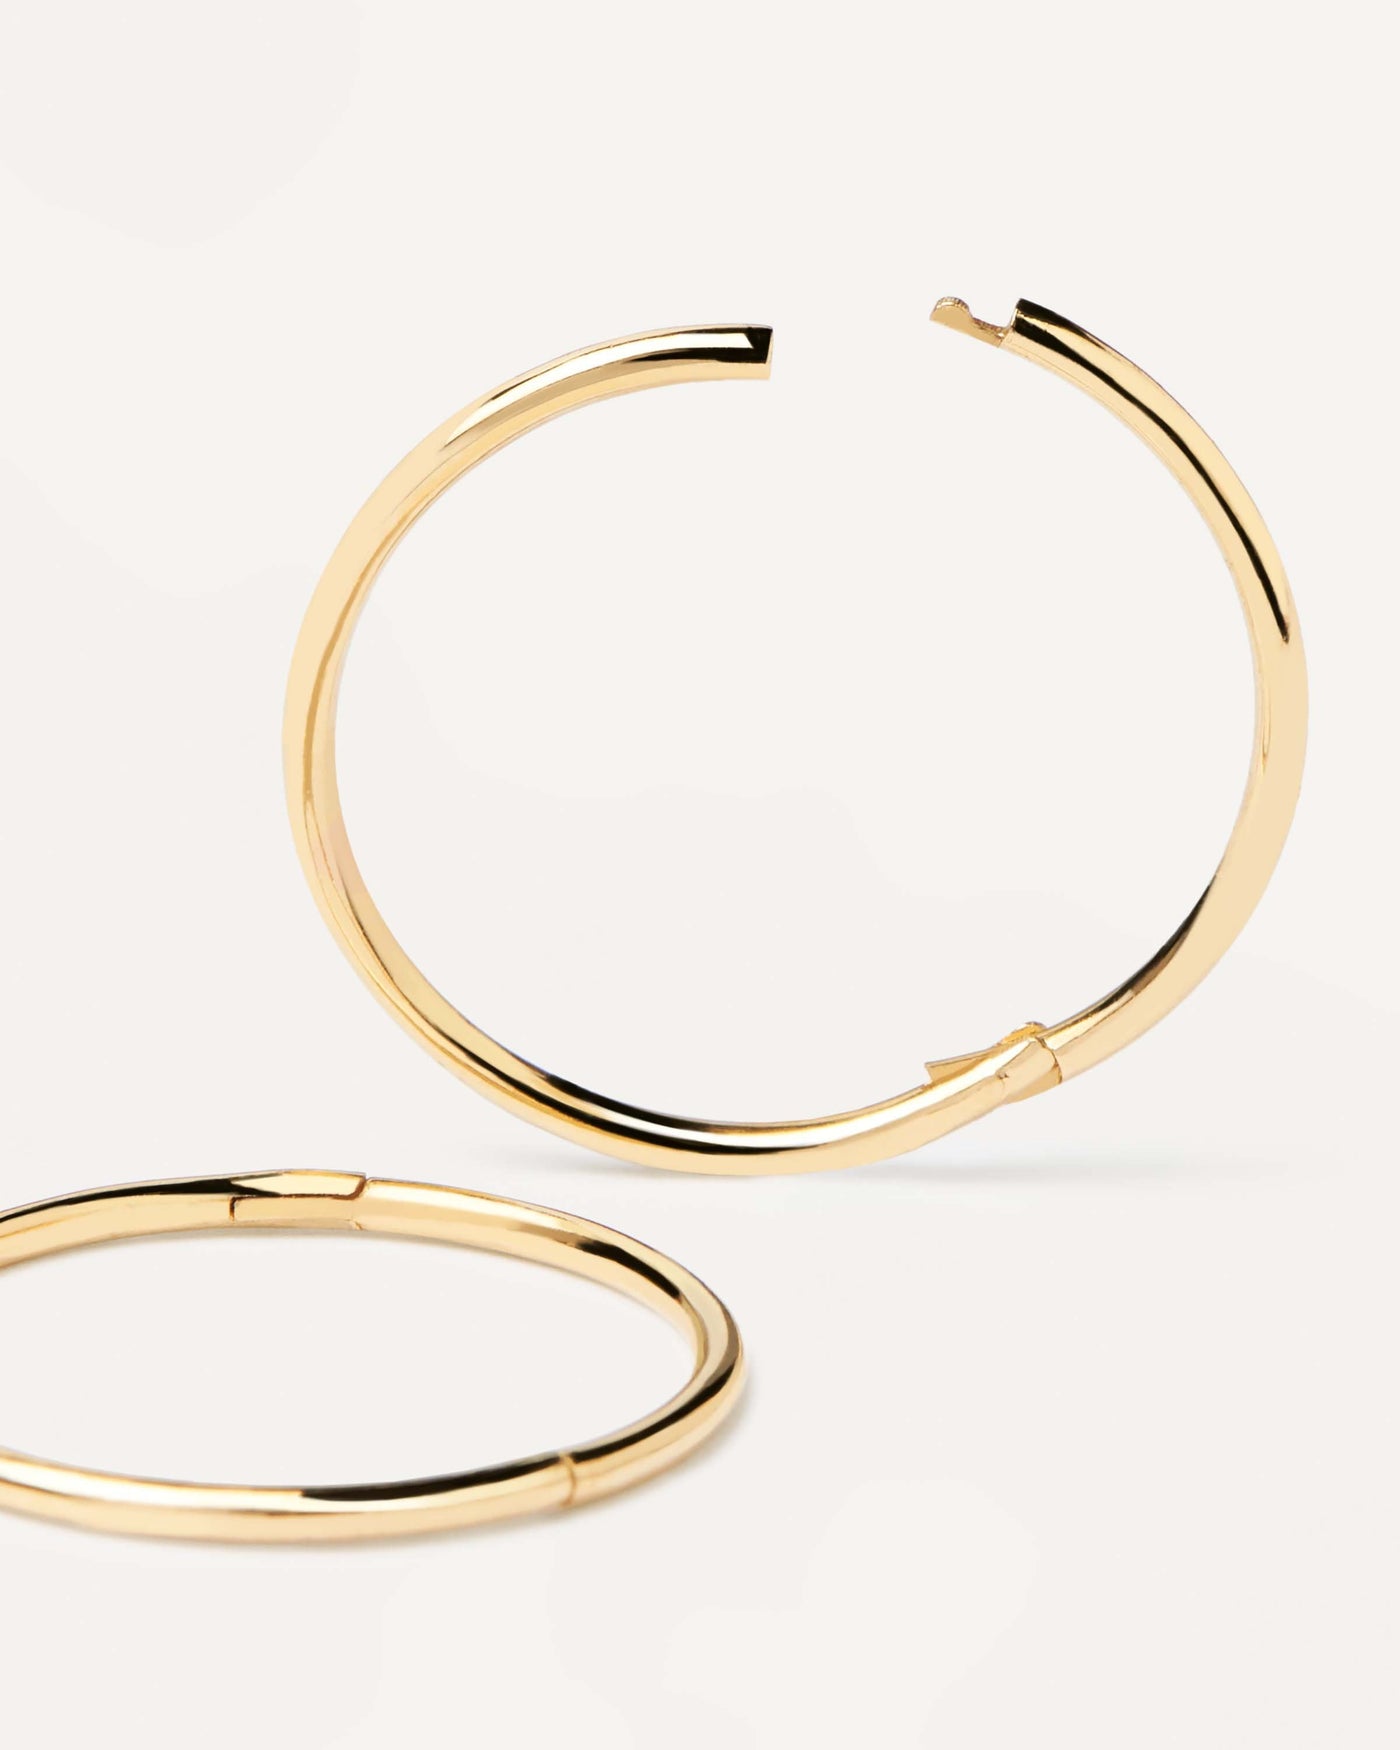 2024 Selection | Gold Essential Medium Hoops. Perfect circle hoops with plain design, made of recycled yellow gold. Get the latest arrival from PDPAOLA. Place your order safely and get this Best Seller. Free Shipping.